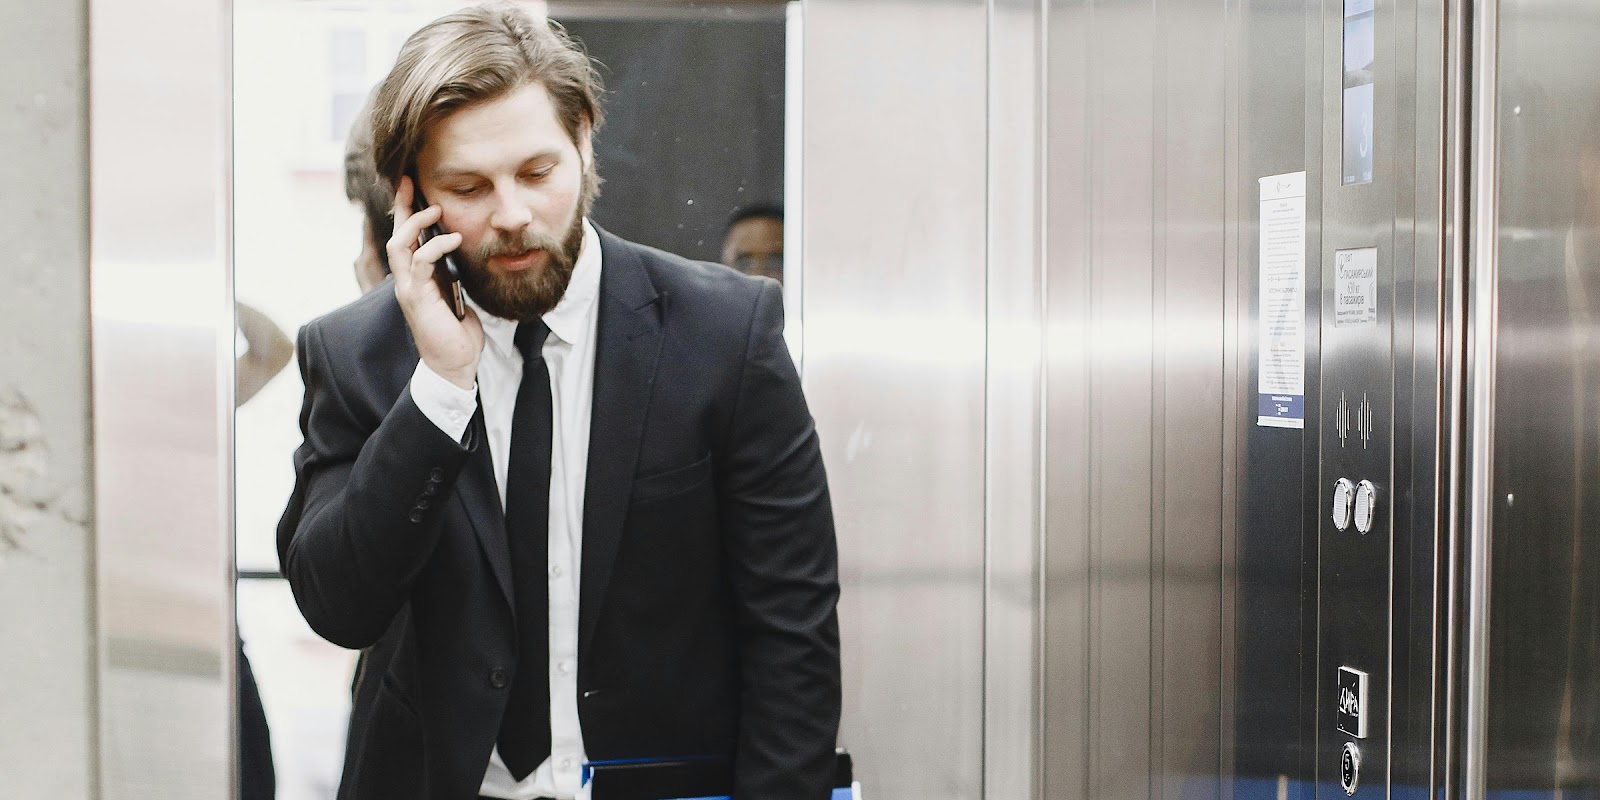 A man in the elevator | Source: Pexels